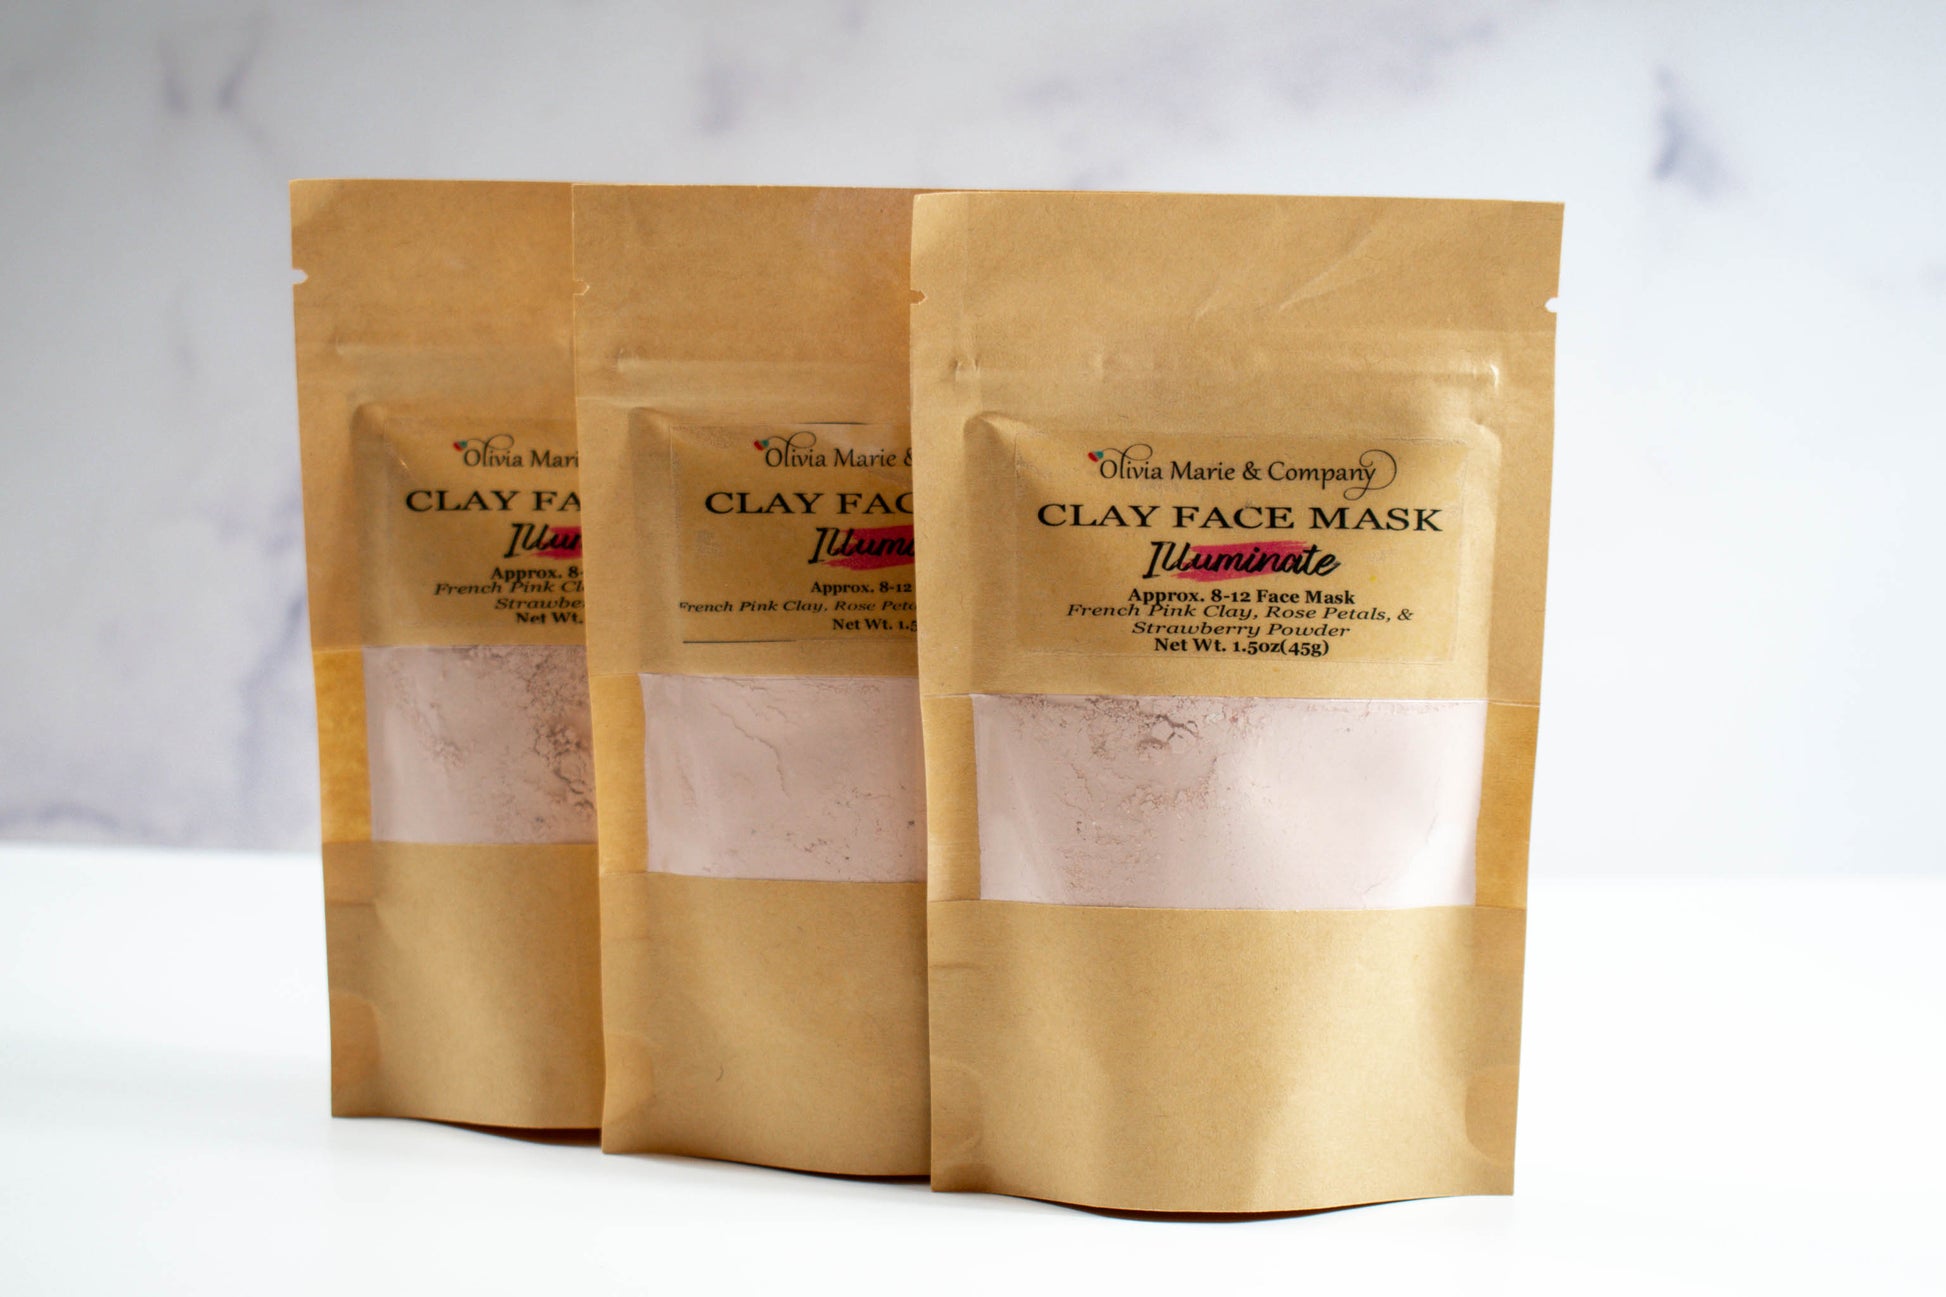 Pink clay face mask in brown bag with clear window.